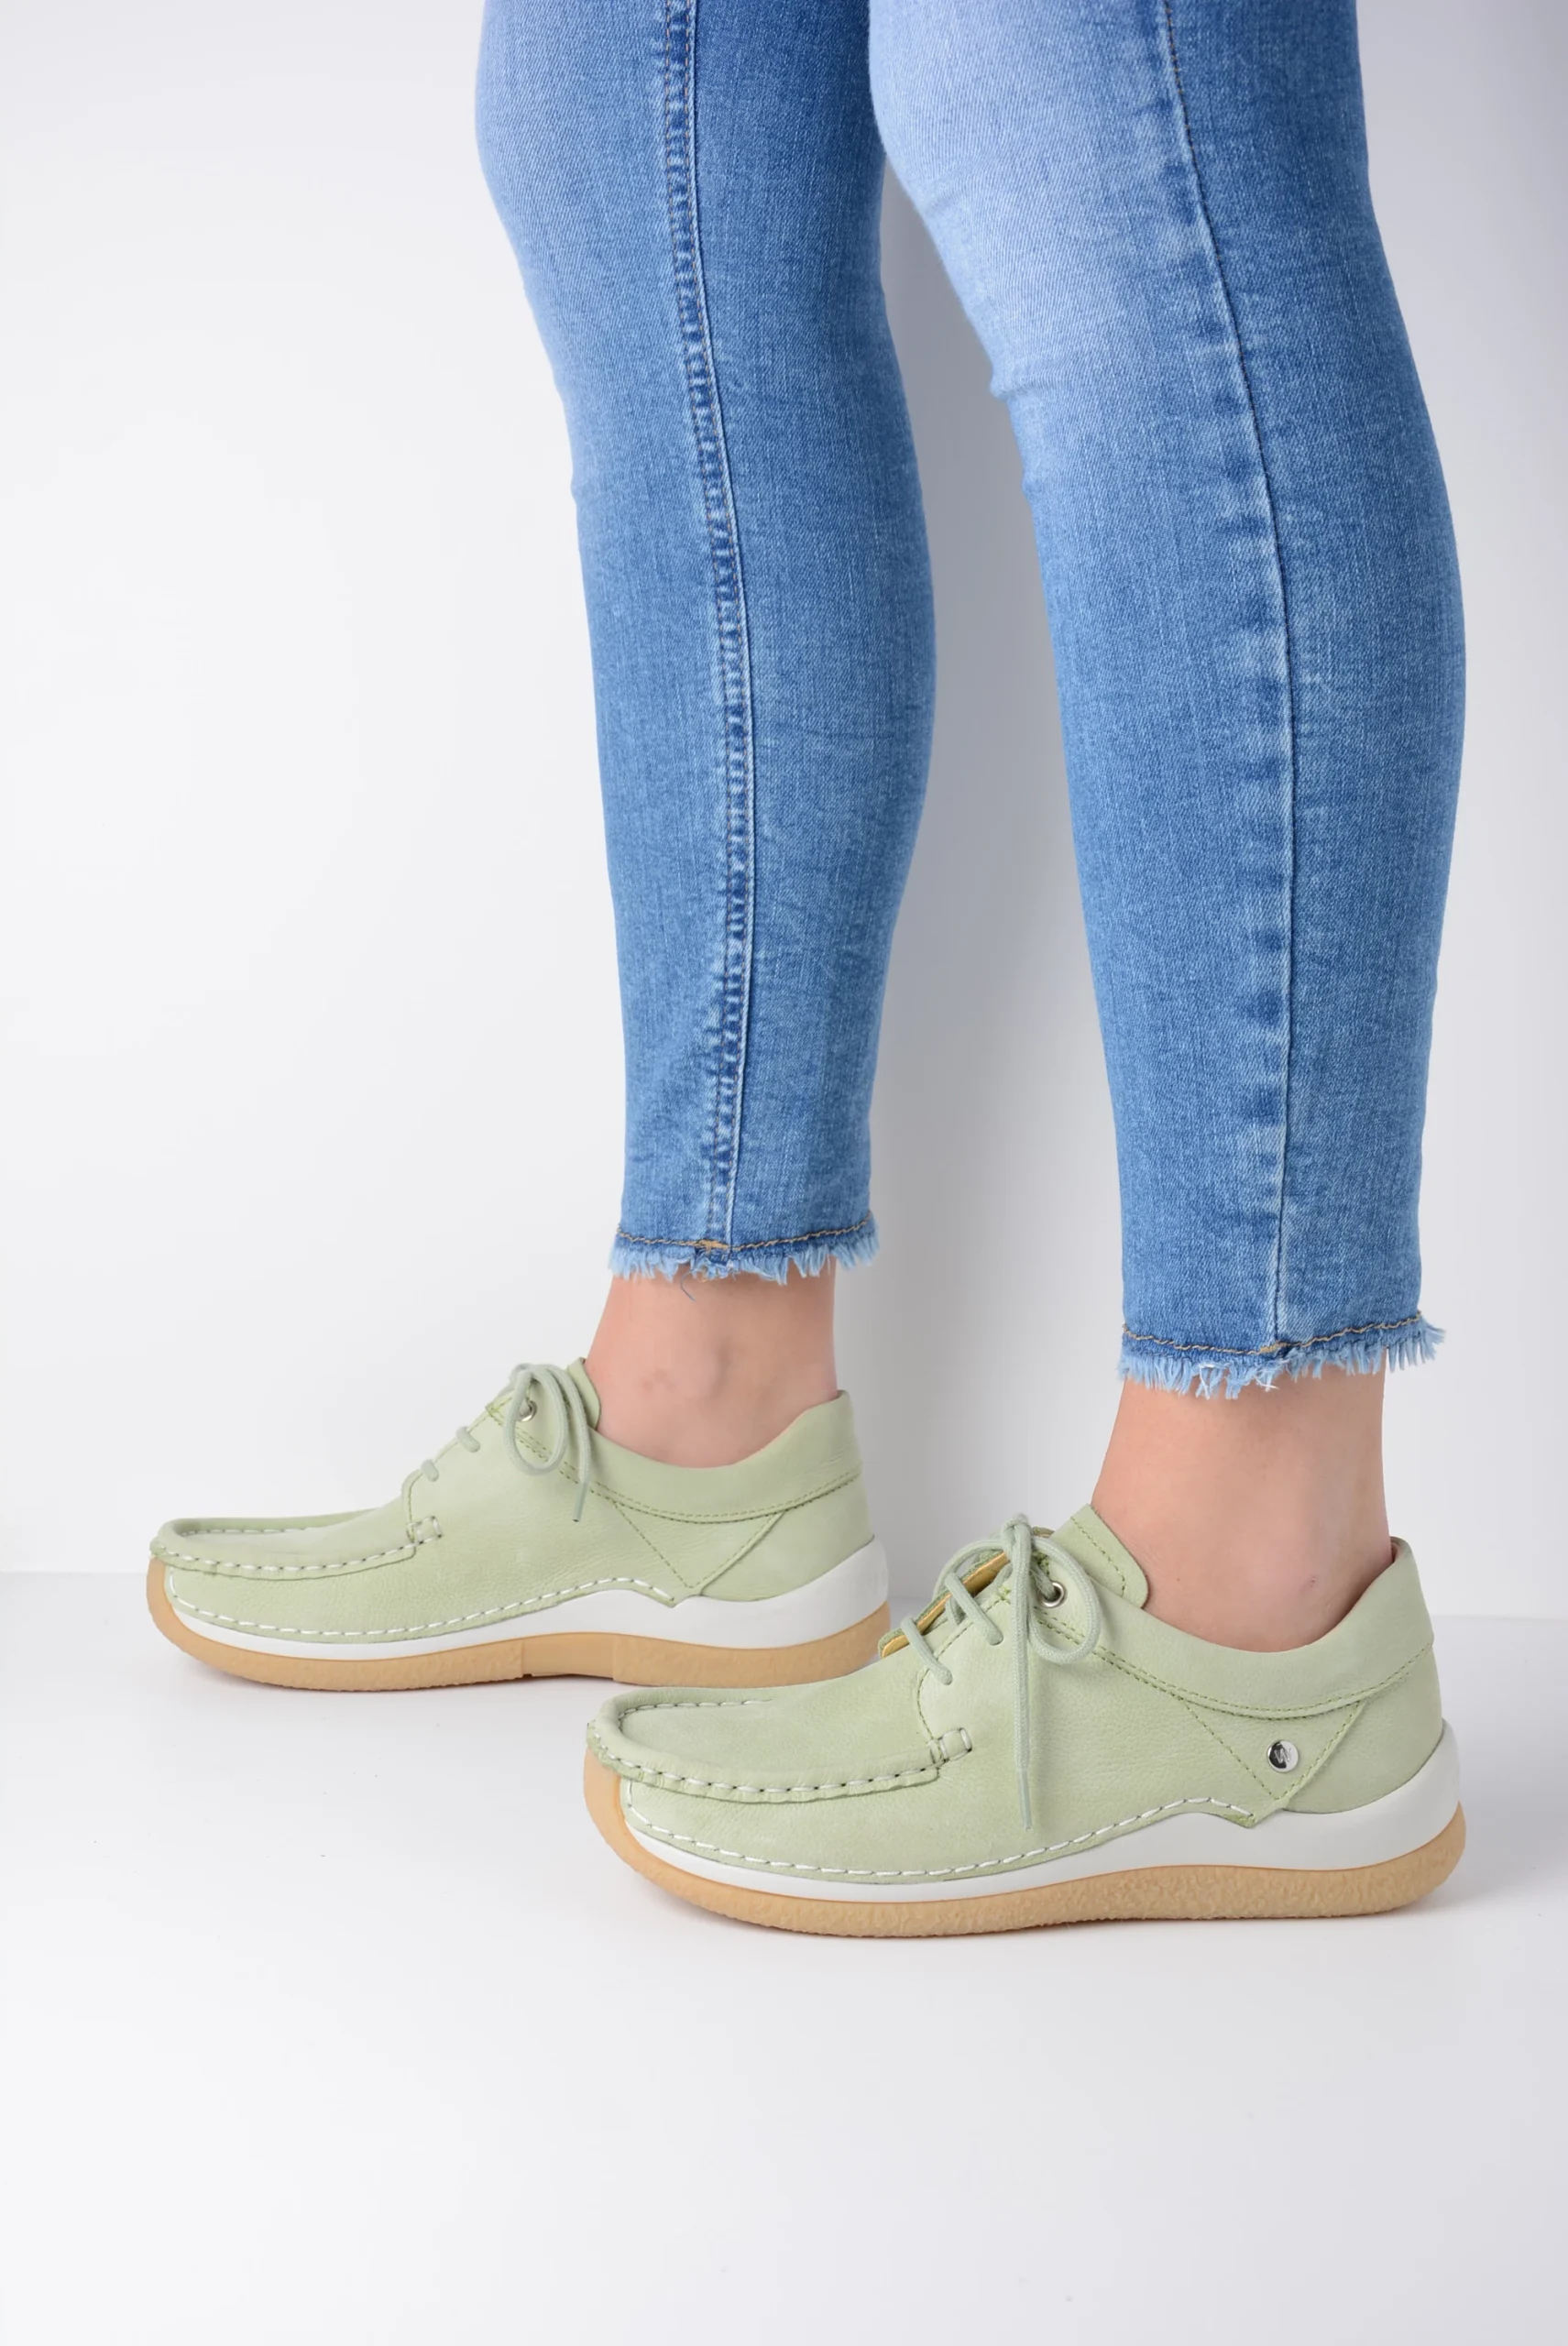 wolky low lace up shoes 04525 celebration 11706 light green nubuck sfeer